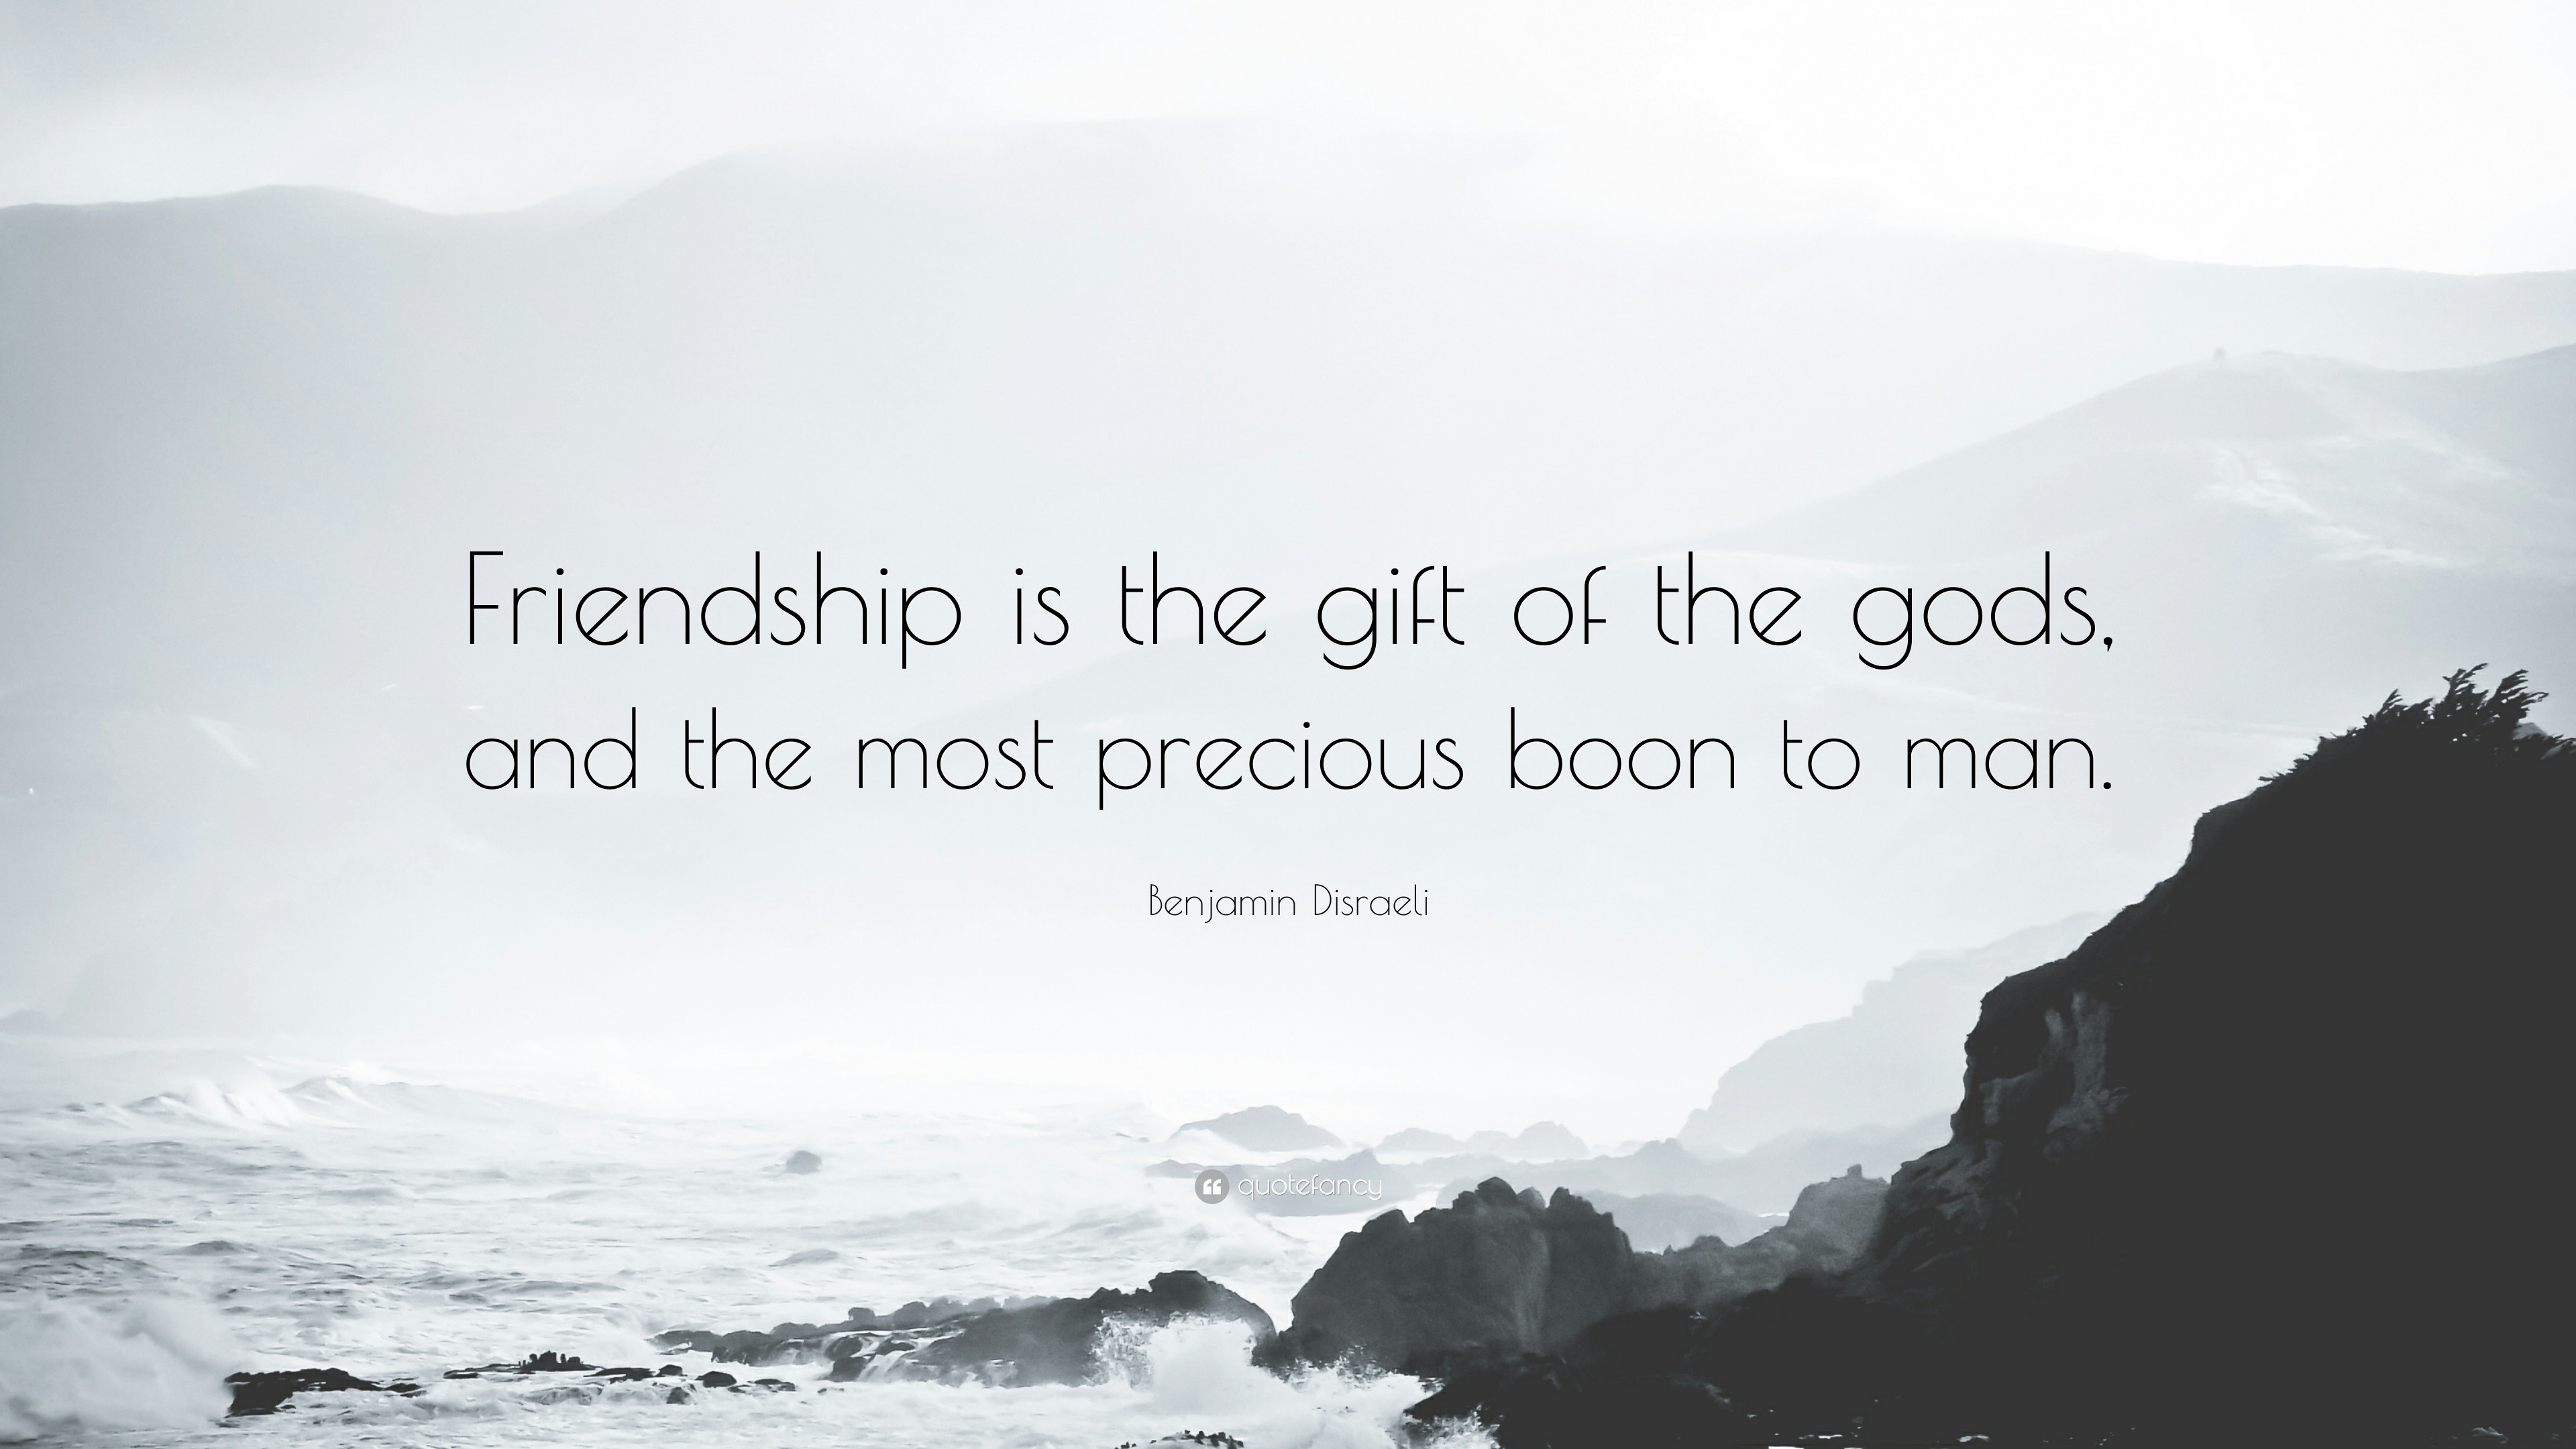 73 Friendship Quotes for your best friends - Inspiring Short Quotes